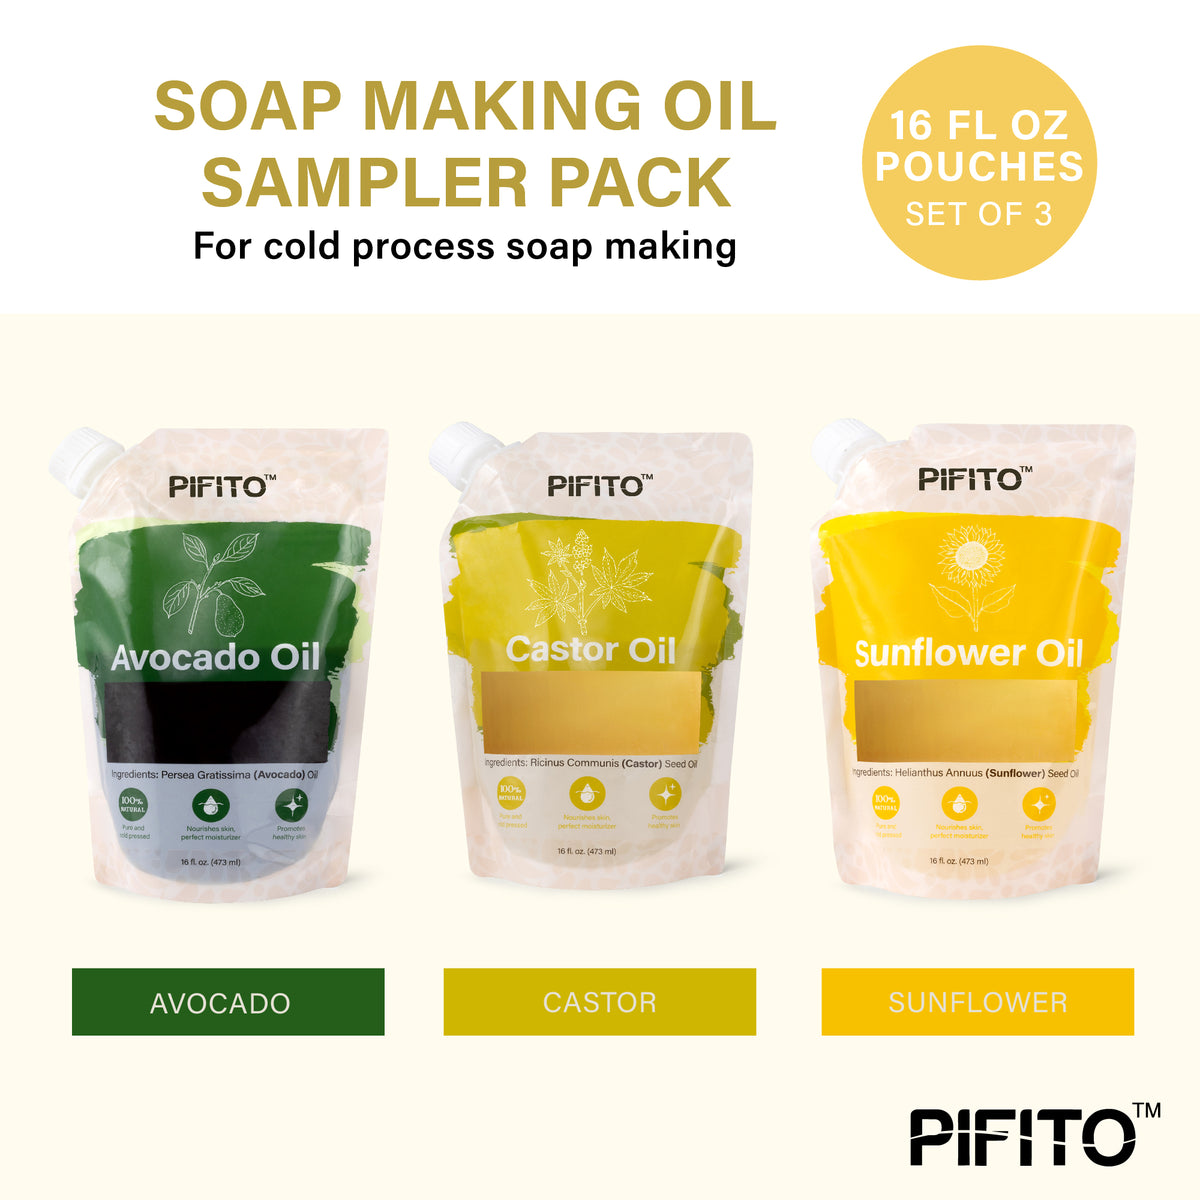  Pifito Olive Oil (32 oz) for Soap Making │ Premium 100% Pure  and Natural Carrier Oil for Essential Oils, Skin Care, Hair and Body Oil,  Moisturizing Massage Oil for Aromatherapy 